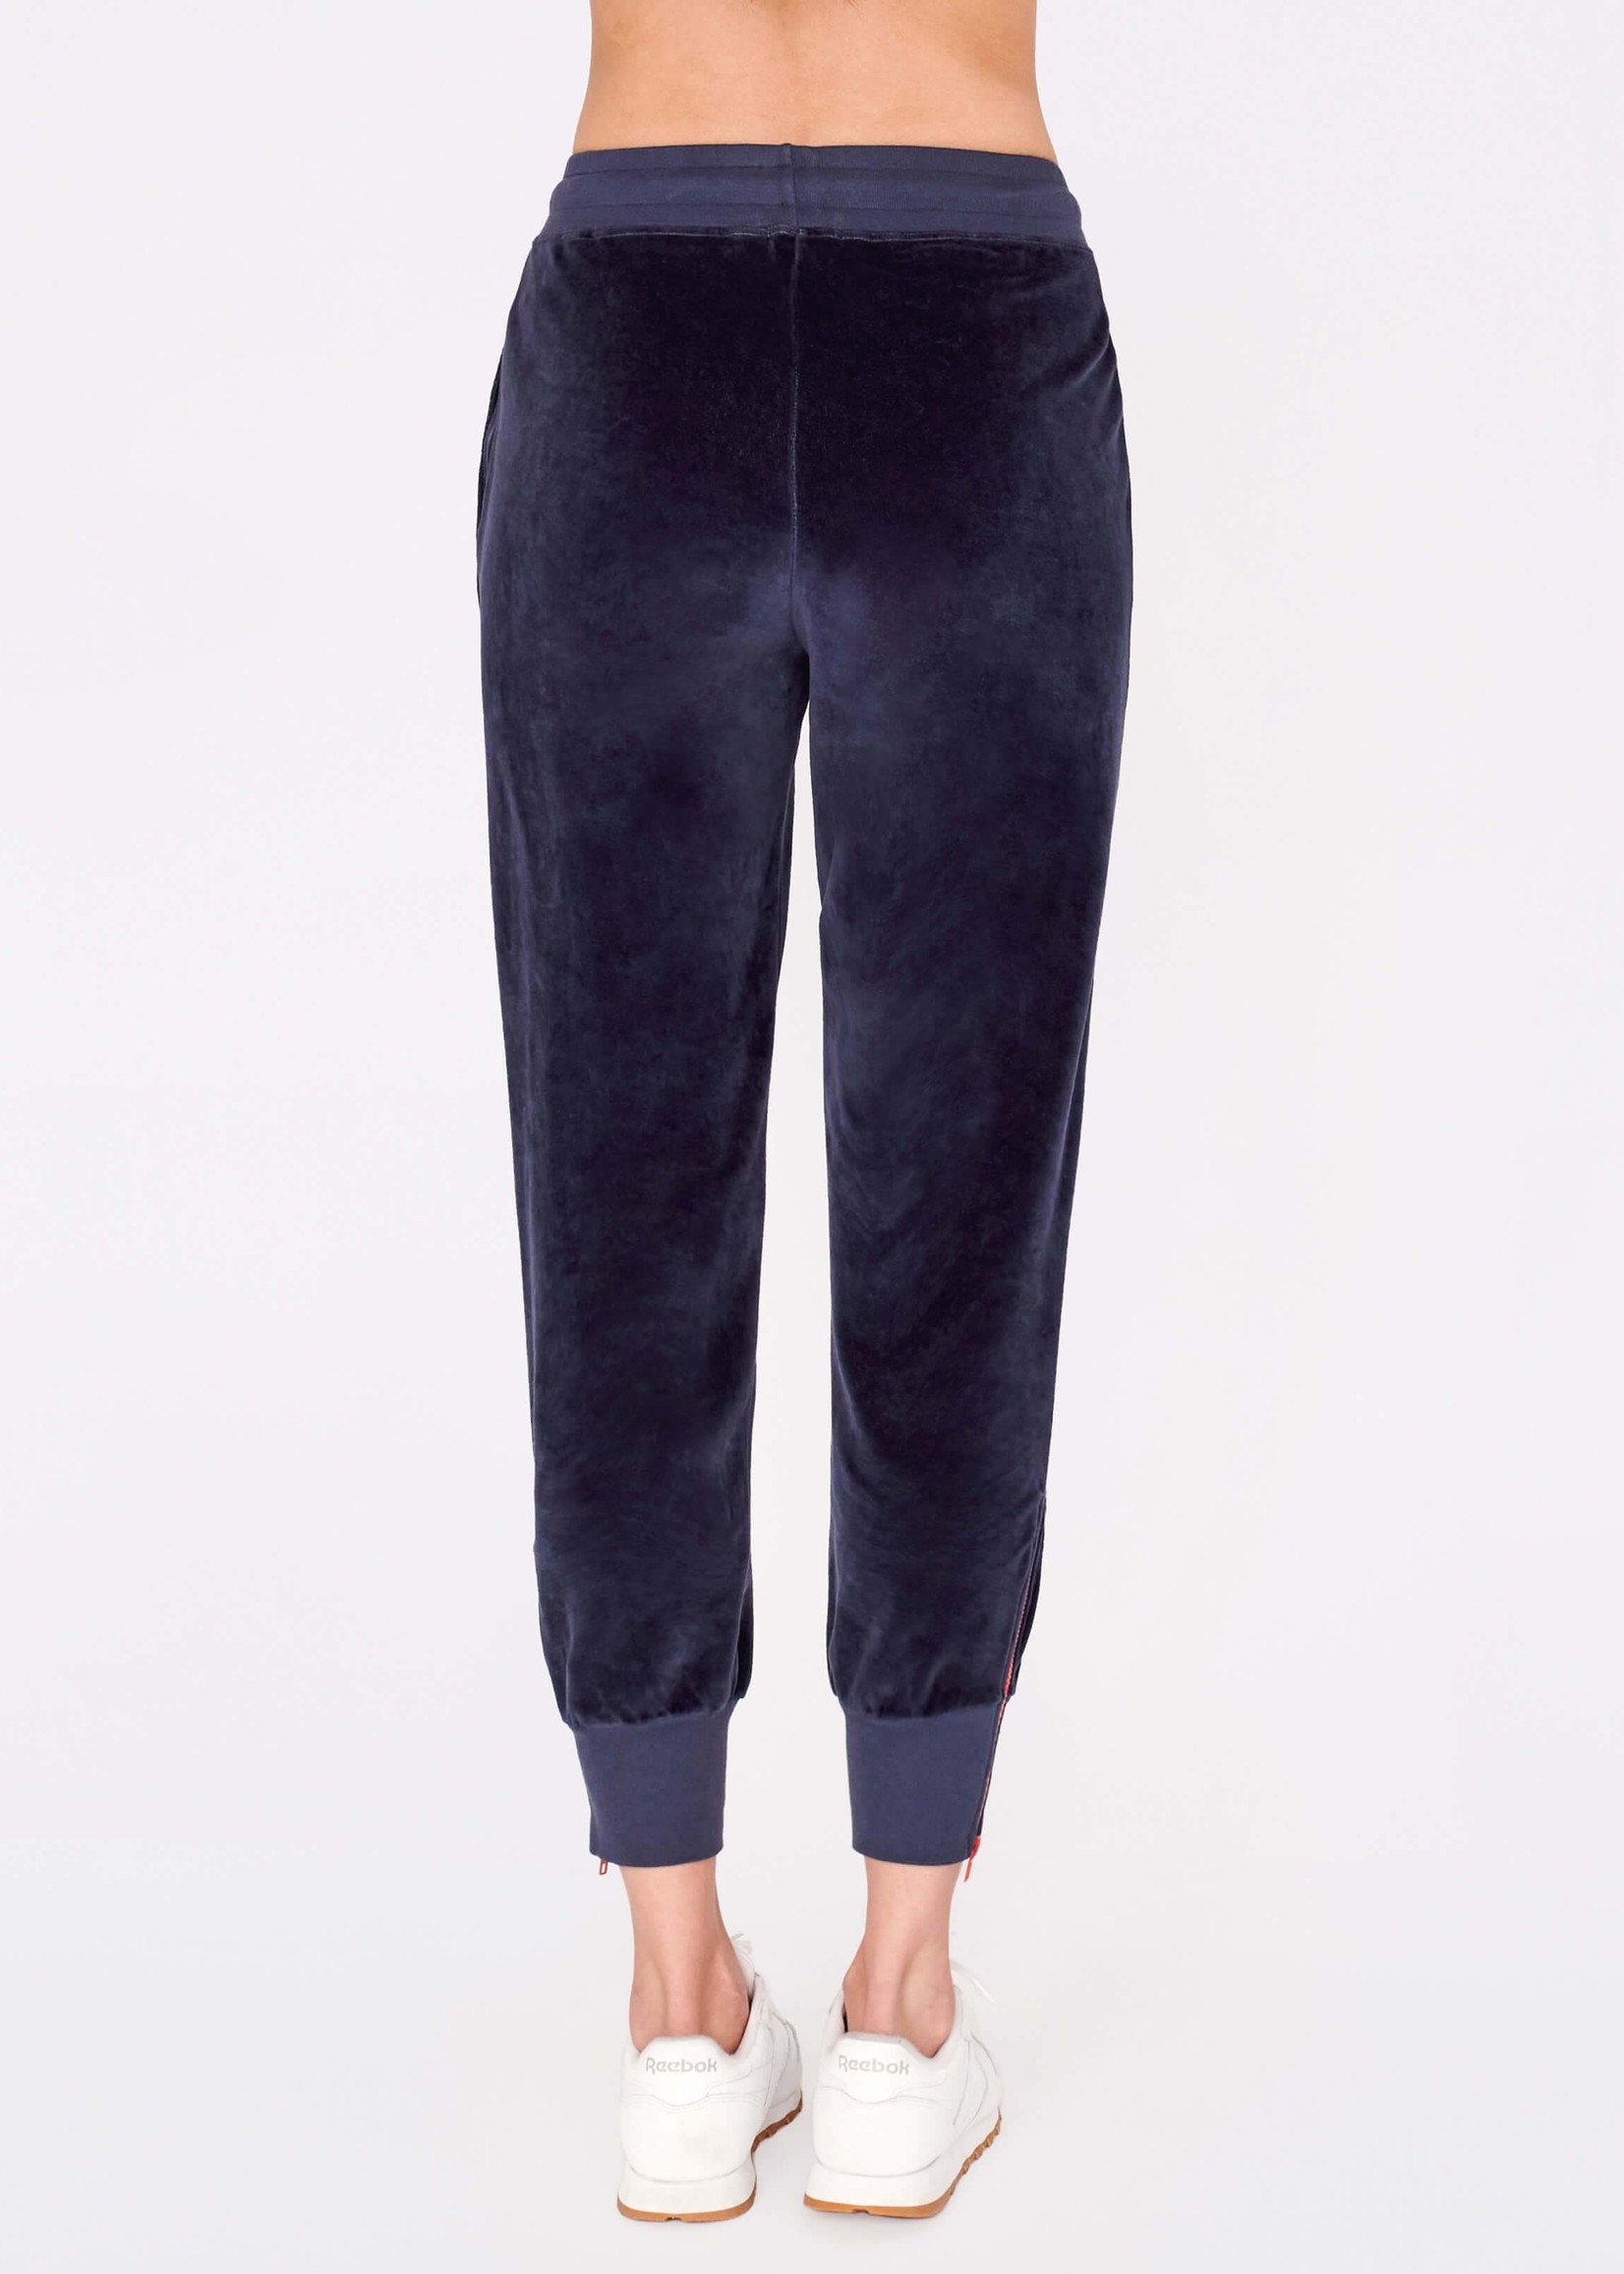 SUNDRY ZIP ANKLE JOGGER